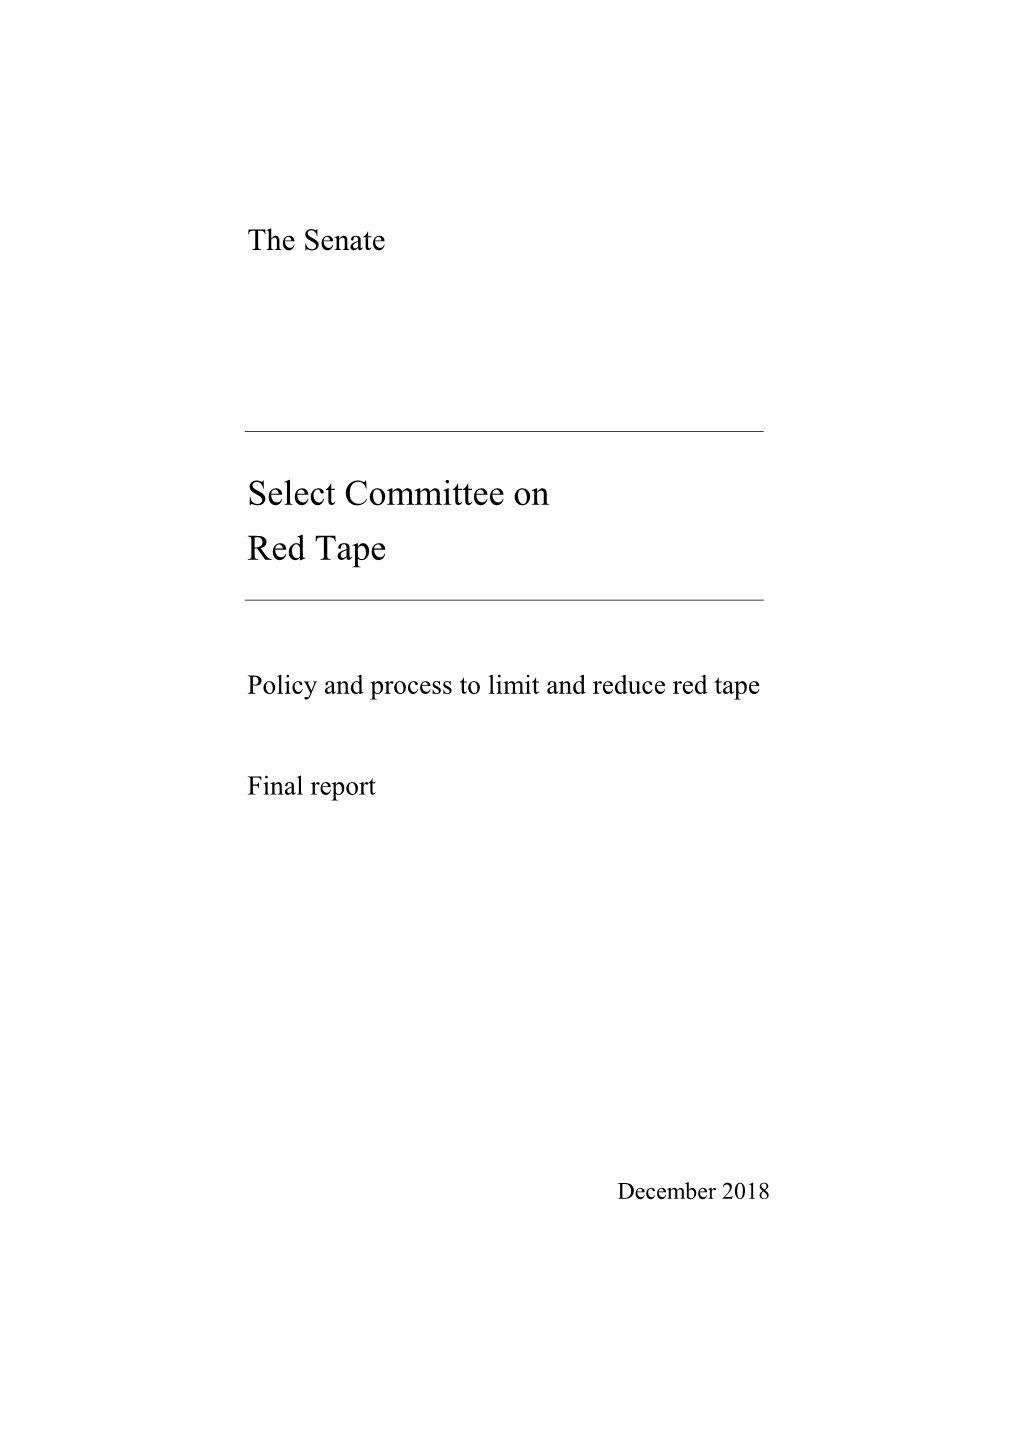 Policy and Process to Limit and Reduce Red Tape